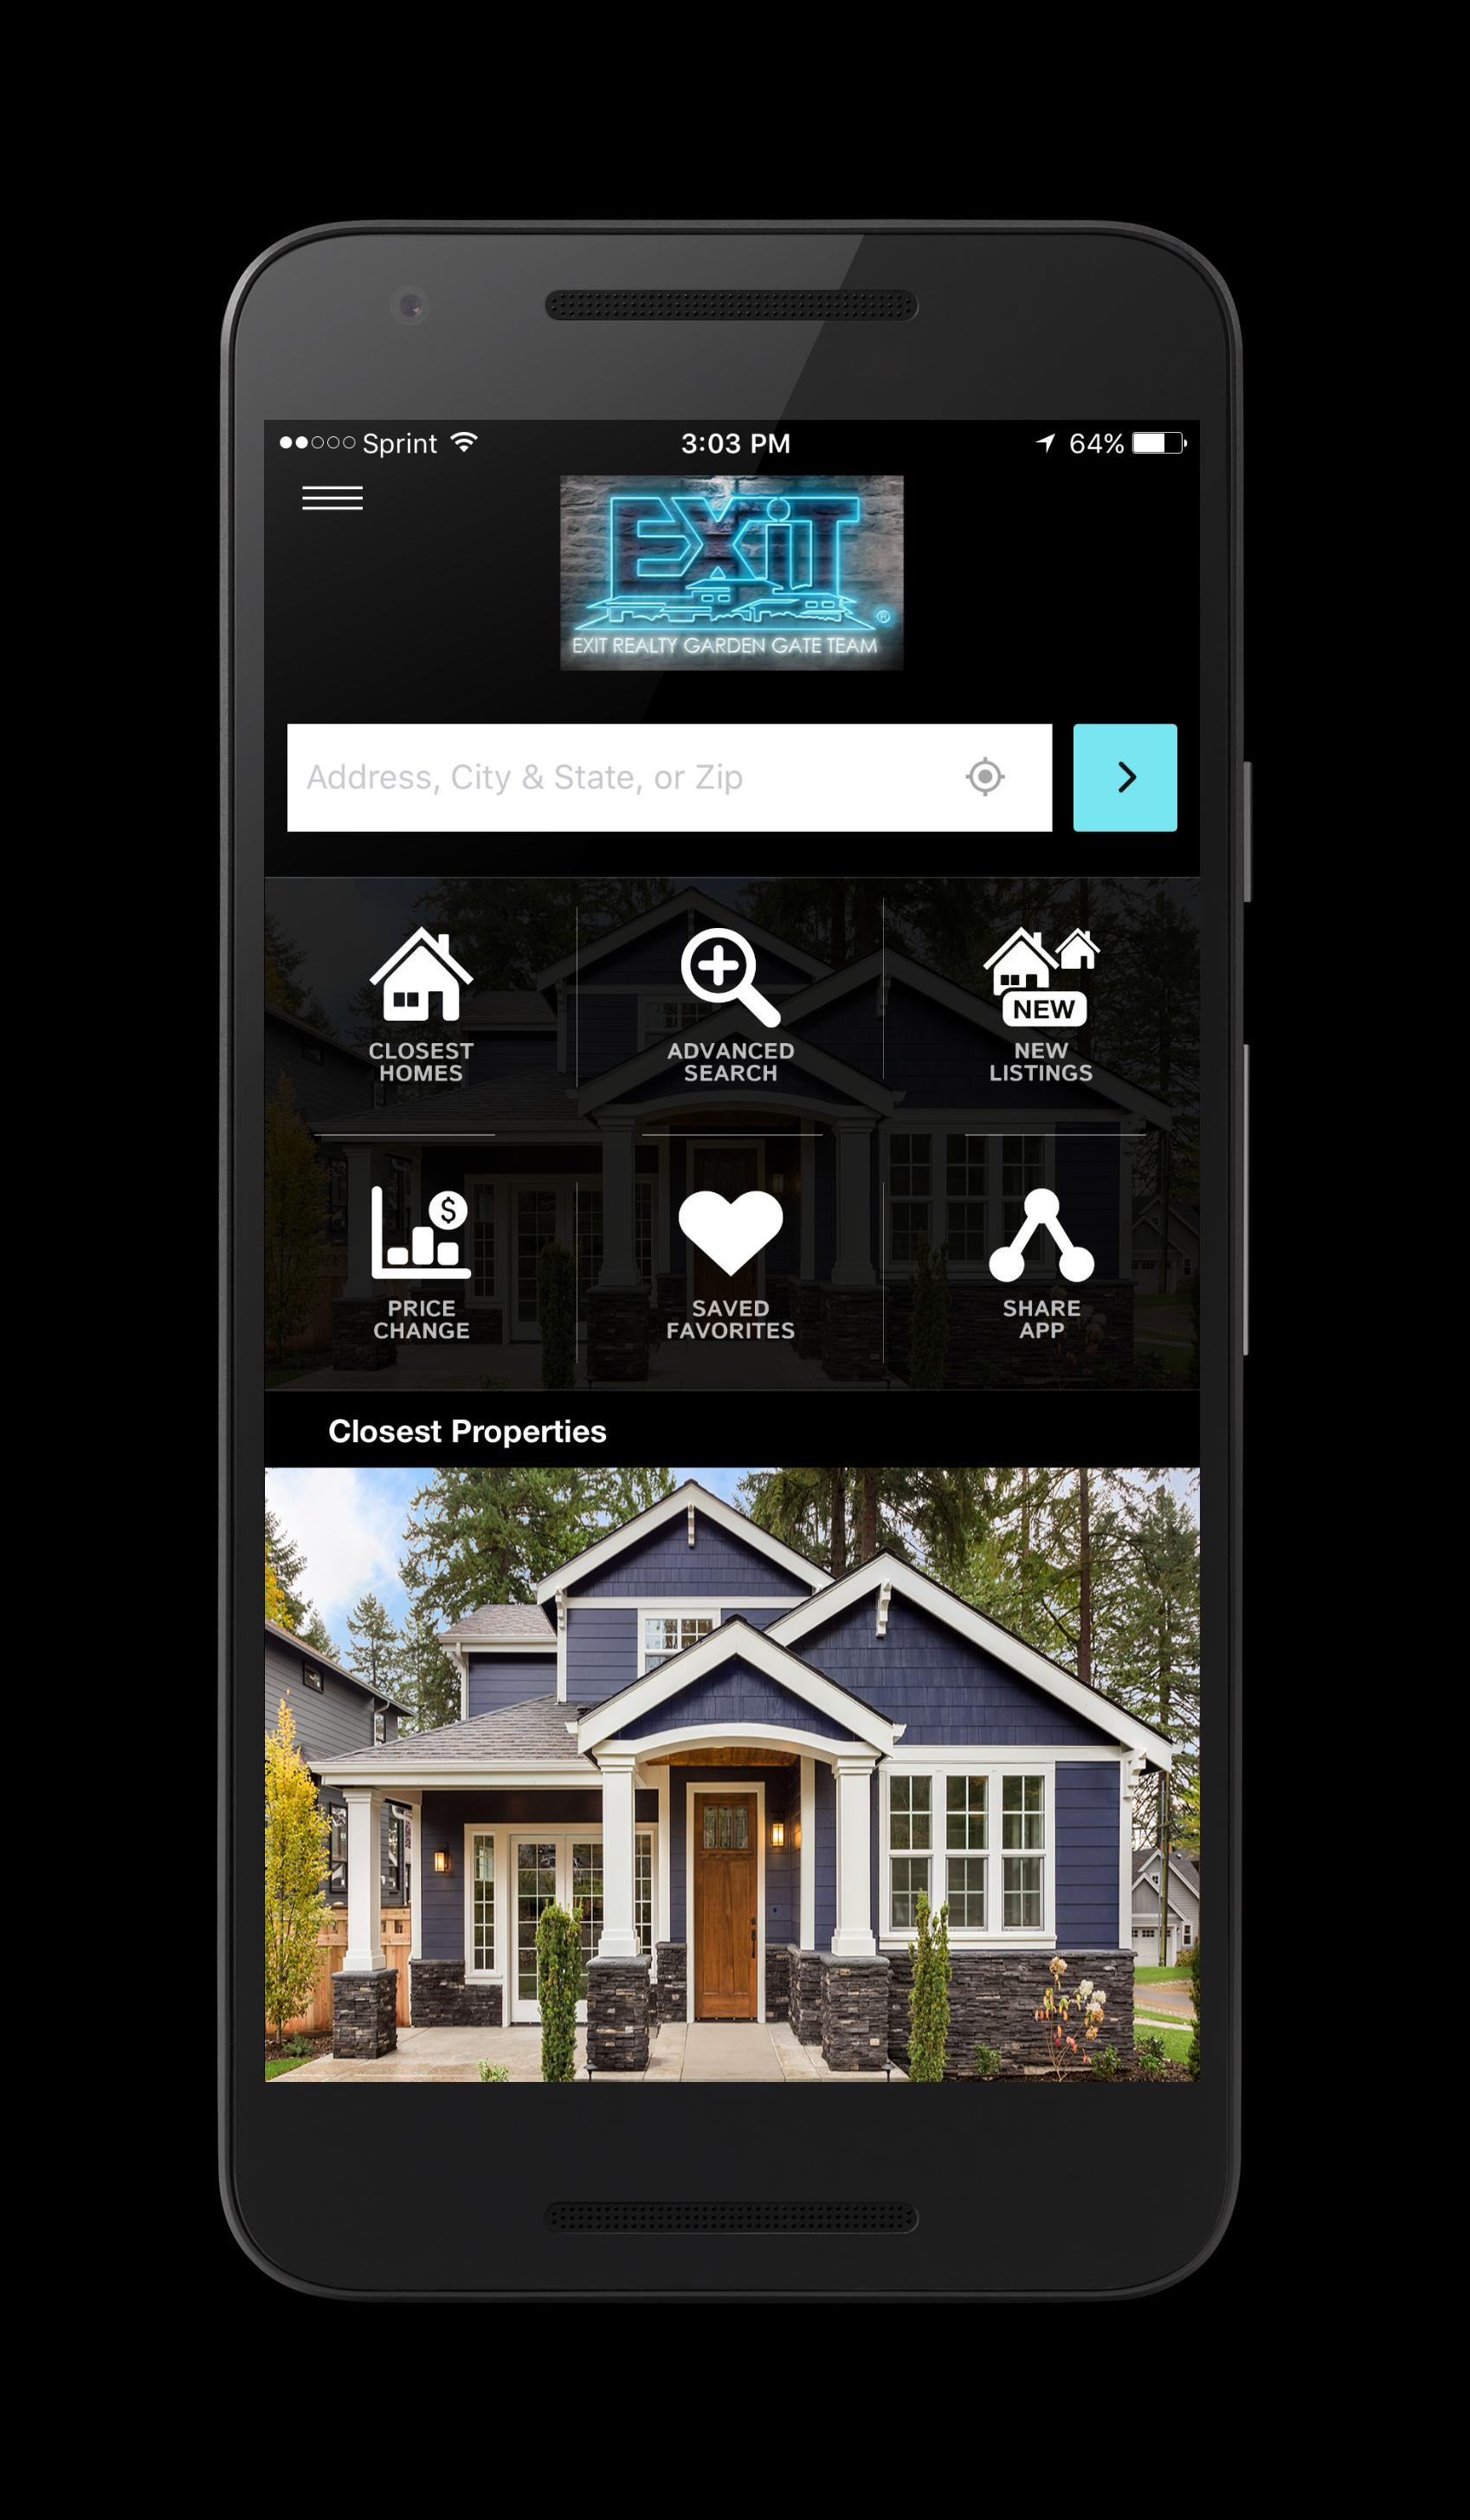 Exit Realty Garden Gate Team For Android Apk Download